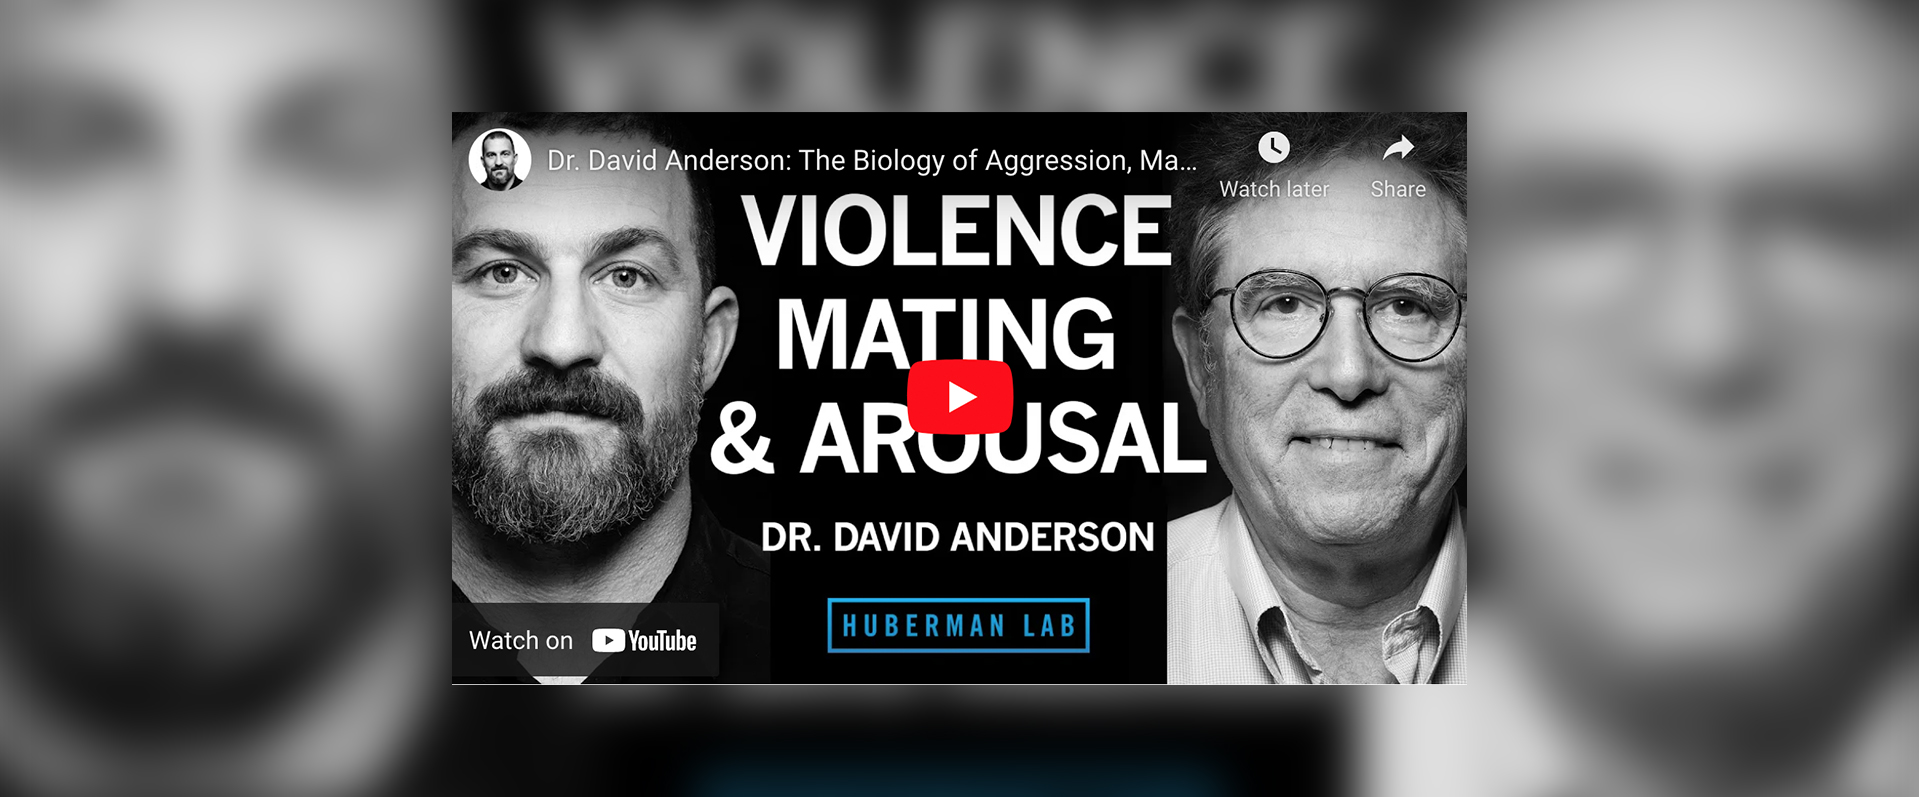 Huberman Lab Podcast interviews David Anderson about the biology of violence, mating and arousal